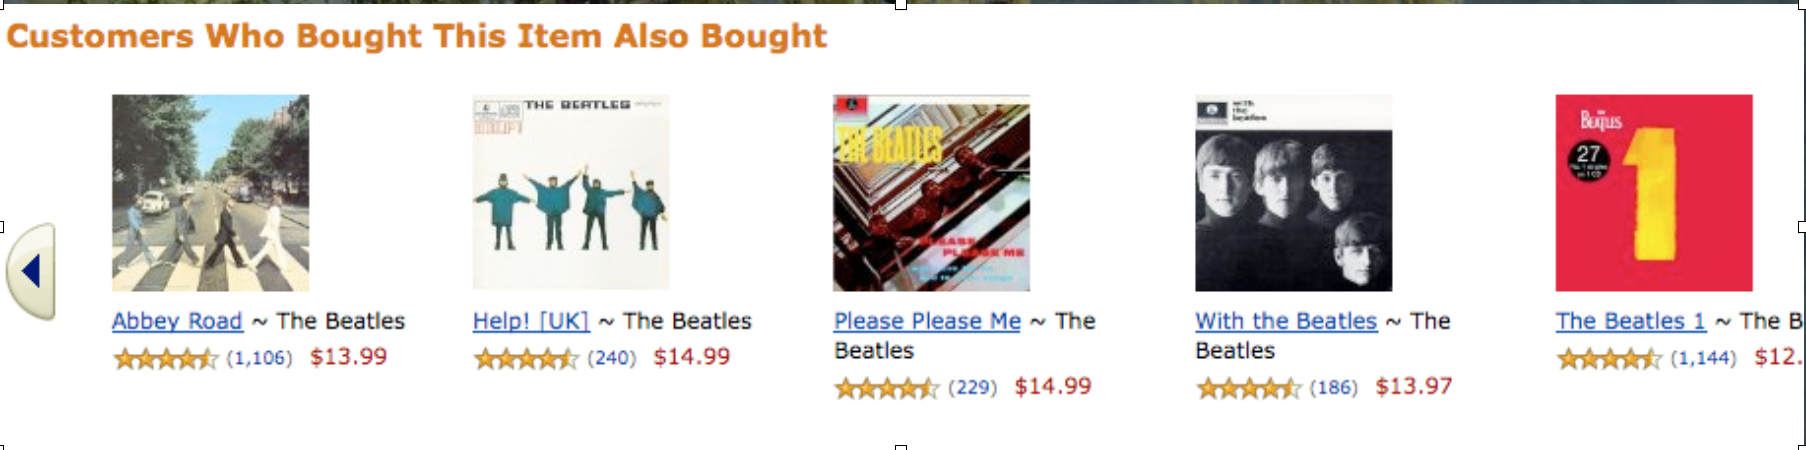 Amazons recommendations for Abbey Road